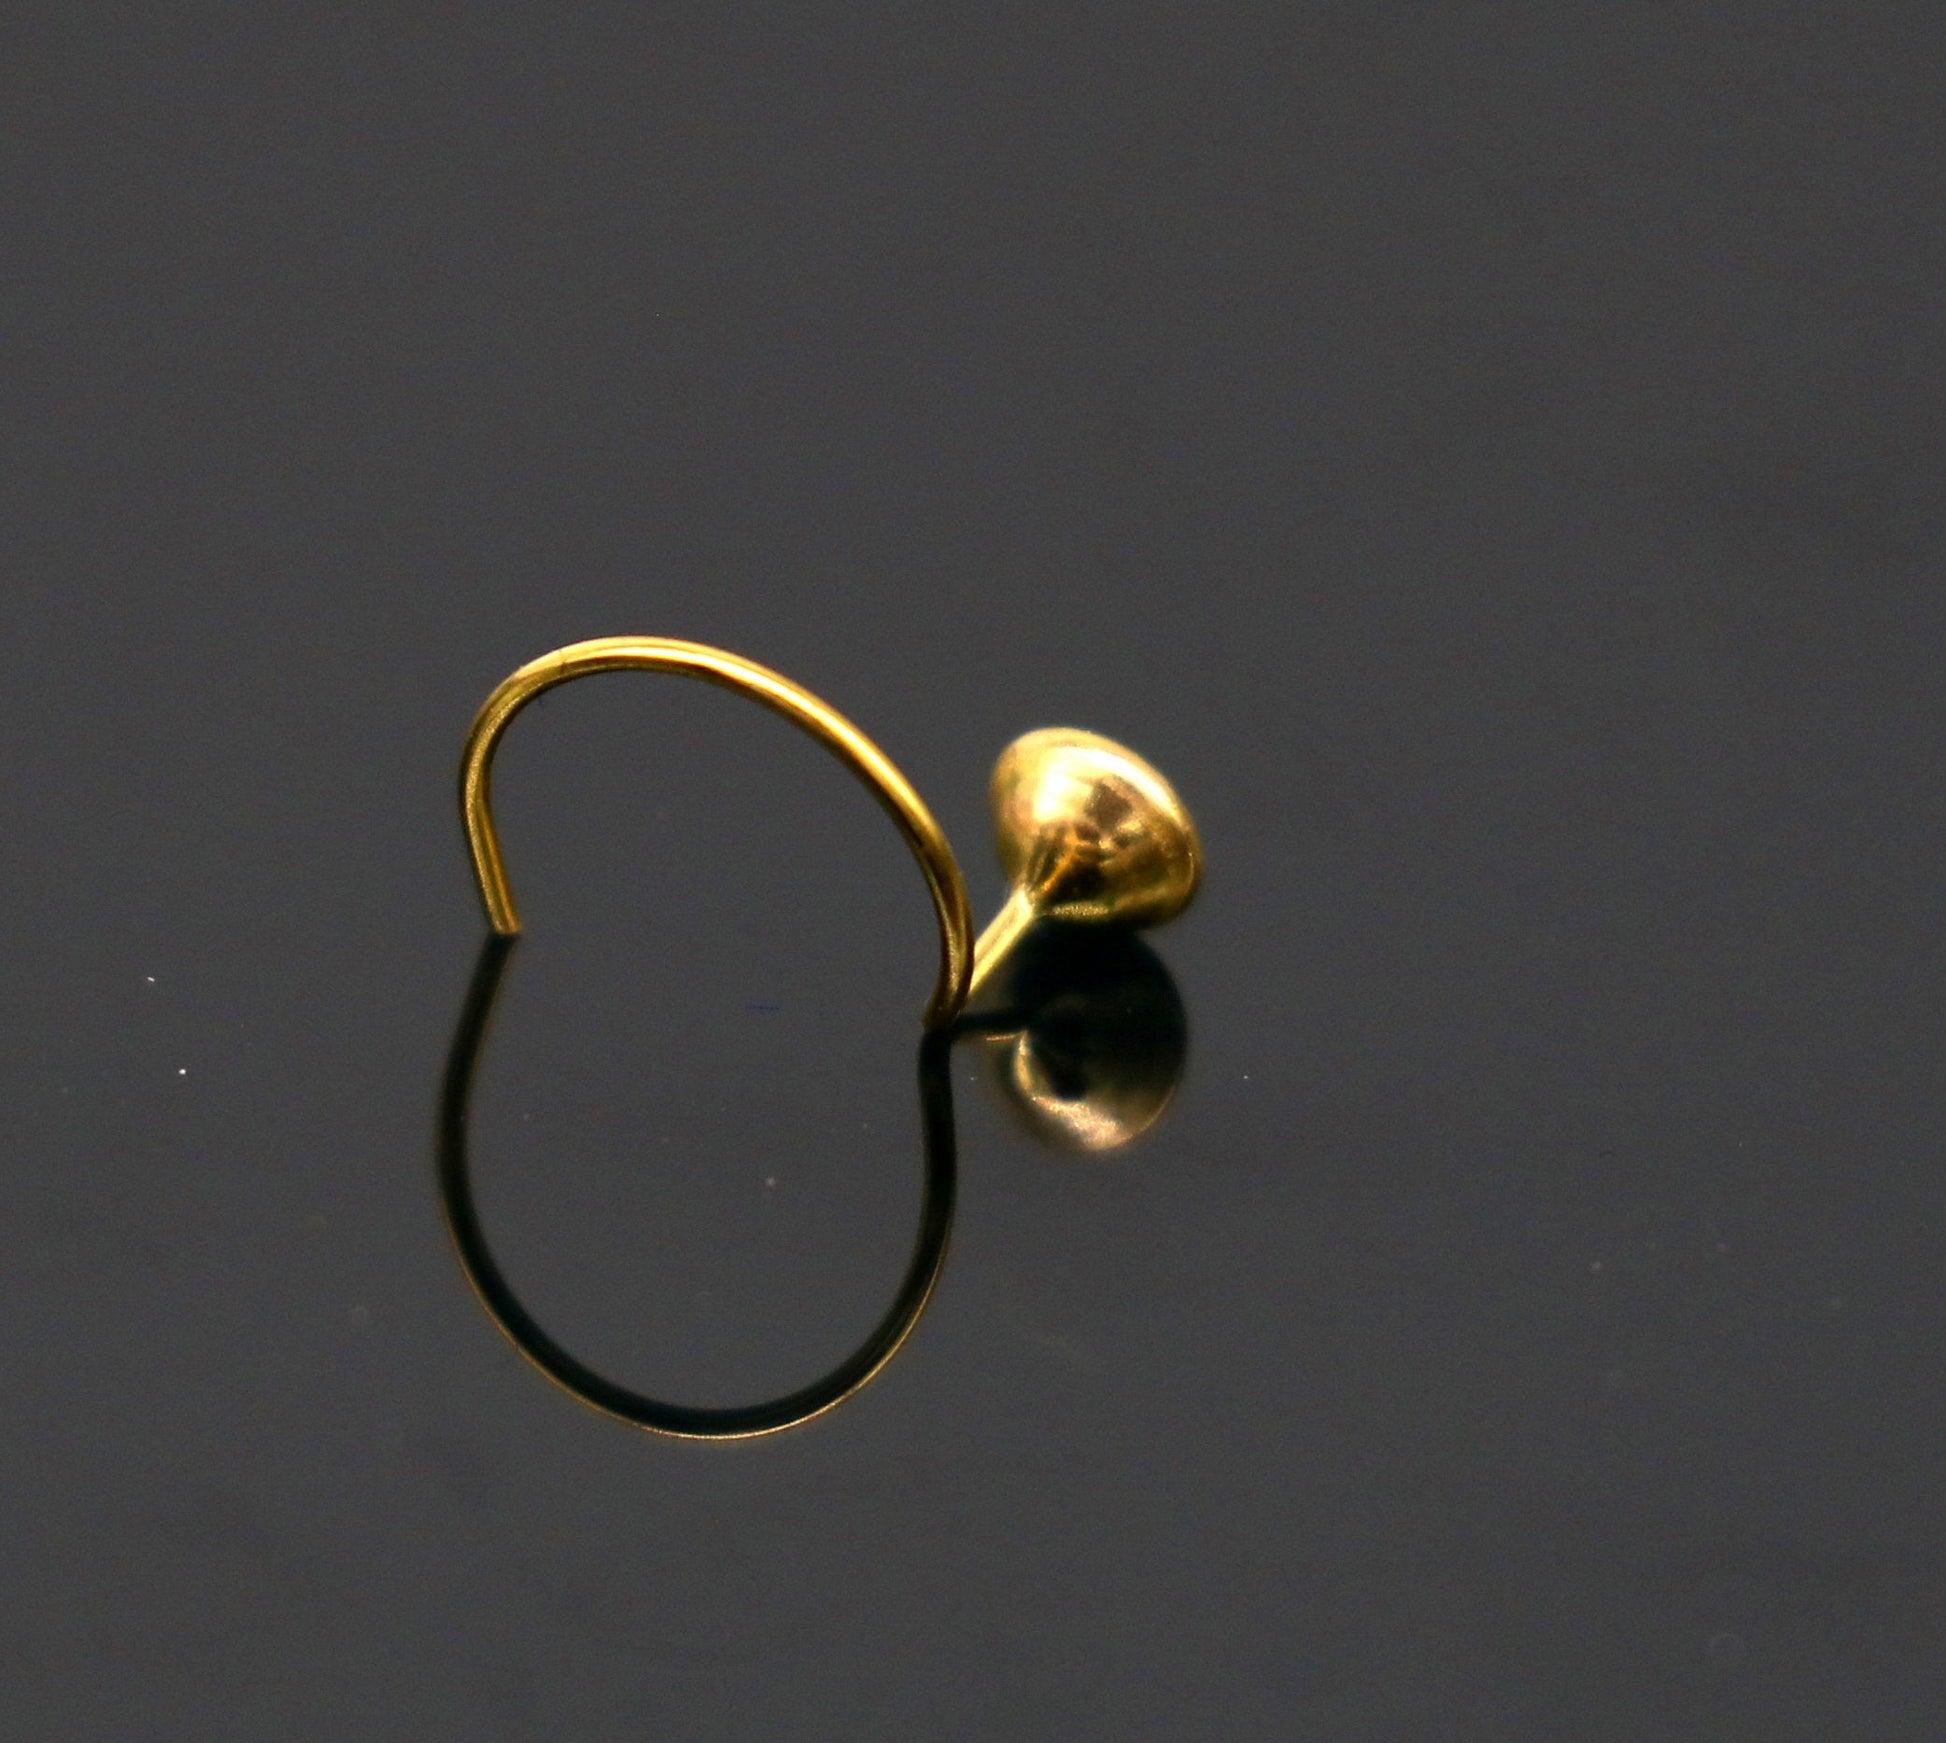 3.5mm 18 kt yellow gold fabulous nose pin, excellent single cz stone nose pin, stunning design gifting gold jewelry for girl's women's gnp40 - TRIBAL ORNAMENTS